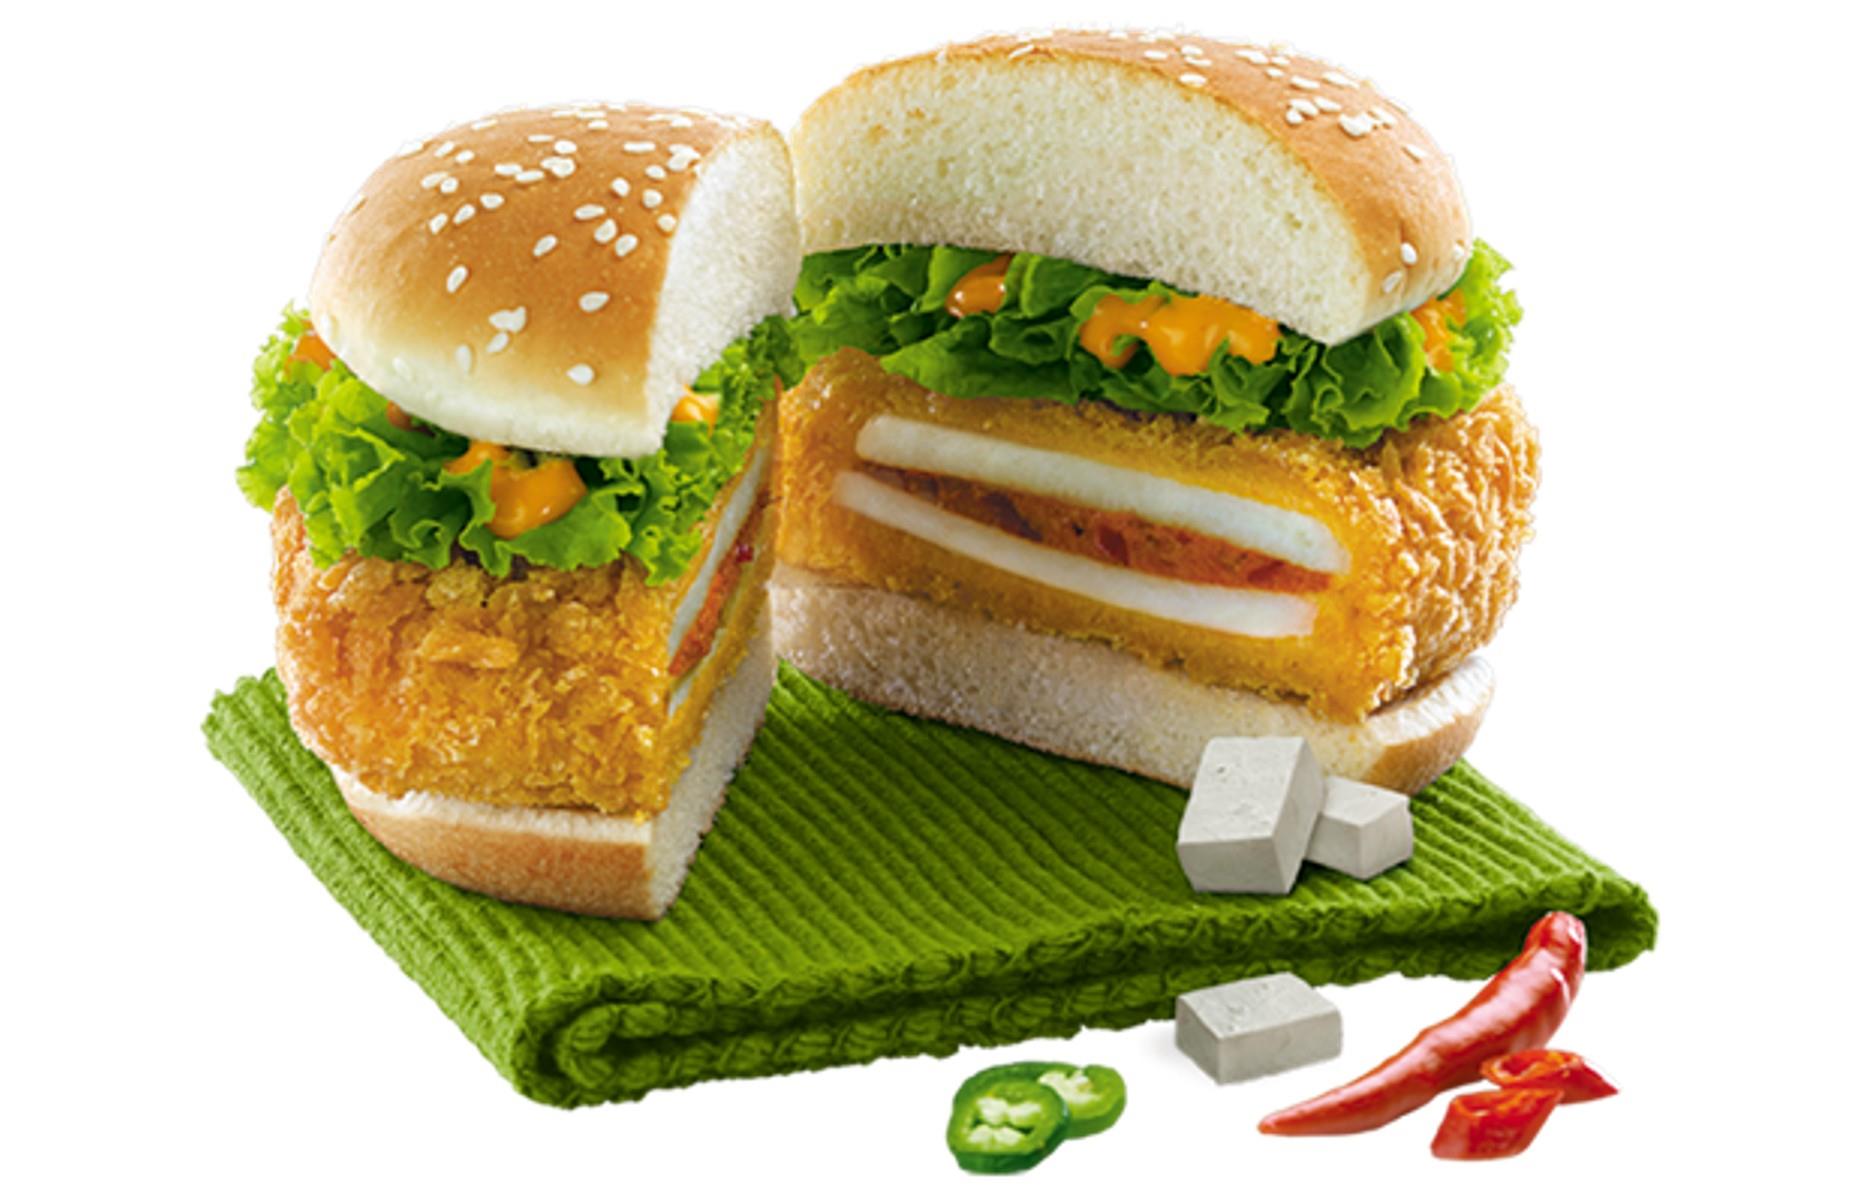 <p>Also launched in India in 2014, the Paneer Zinger featured a paneer (Indian cheese) patty filled with spicy sauce. The meatless dish was backed by a huge advertising campaign. Sadly, from 2016 onwards, the company decided to move away from investing in its vegetarian offering and this spectacular fried chicken alternative was discontinued, much to fans' dismay.</p>